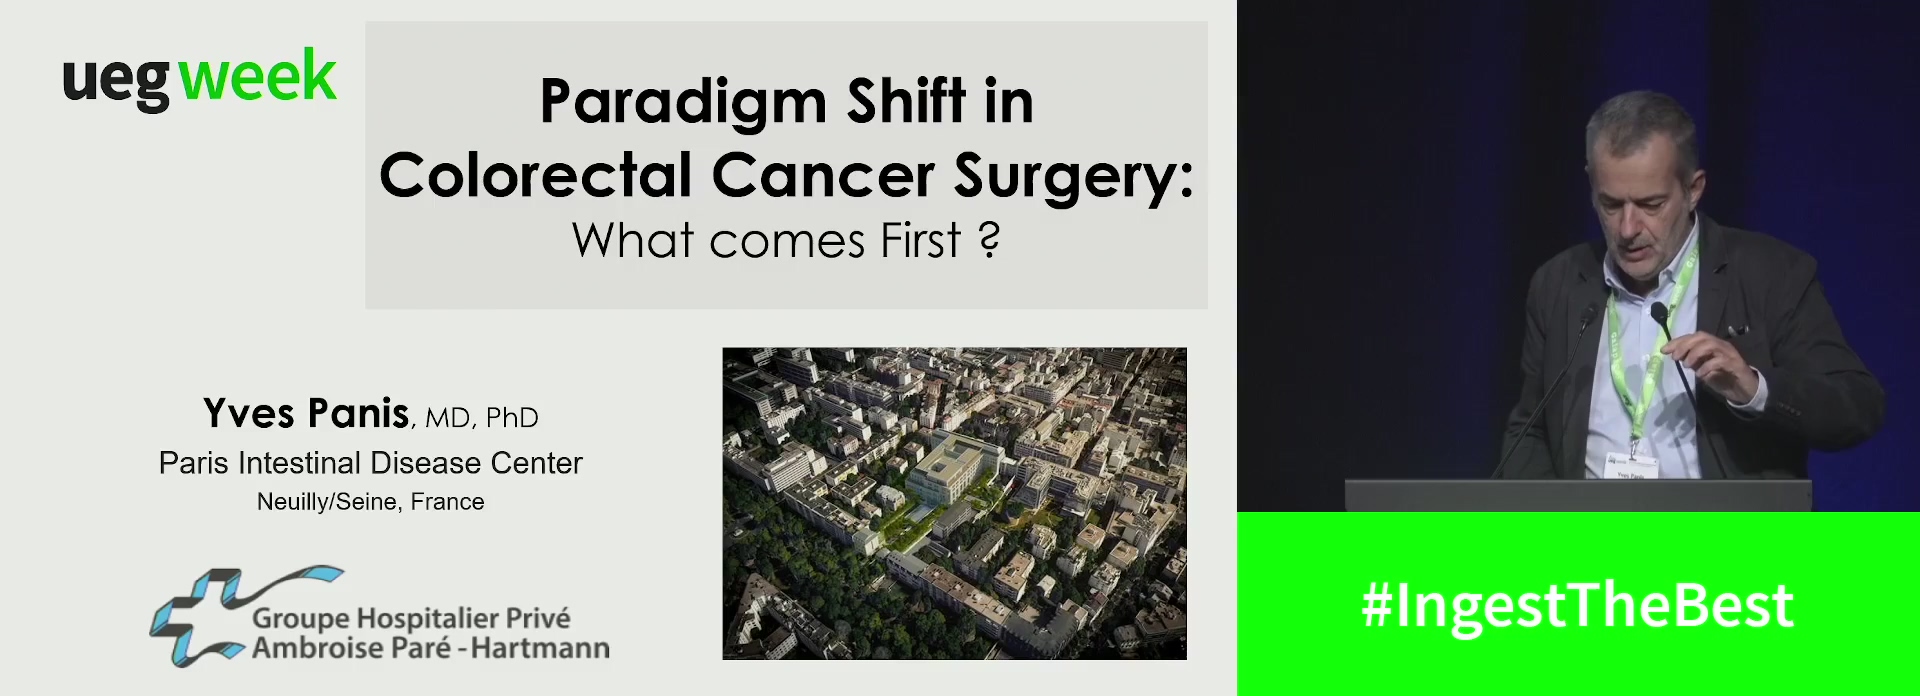 Paradigm shift in CRC surgery: What comes first?